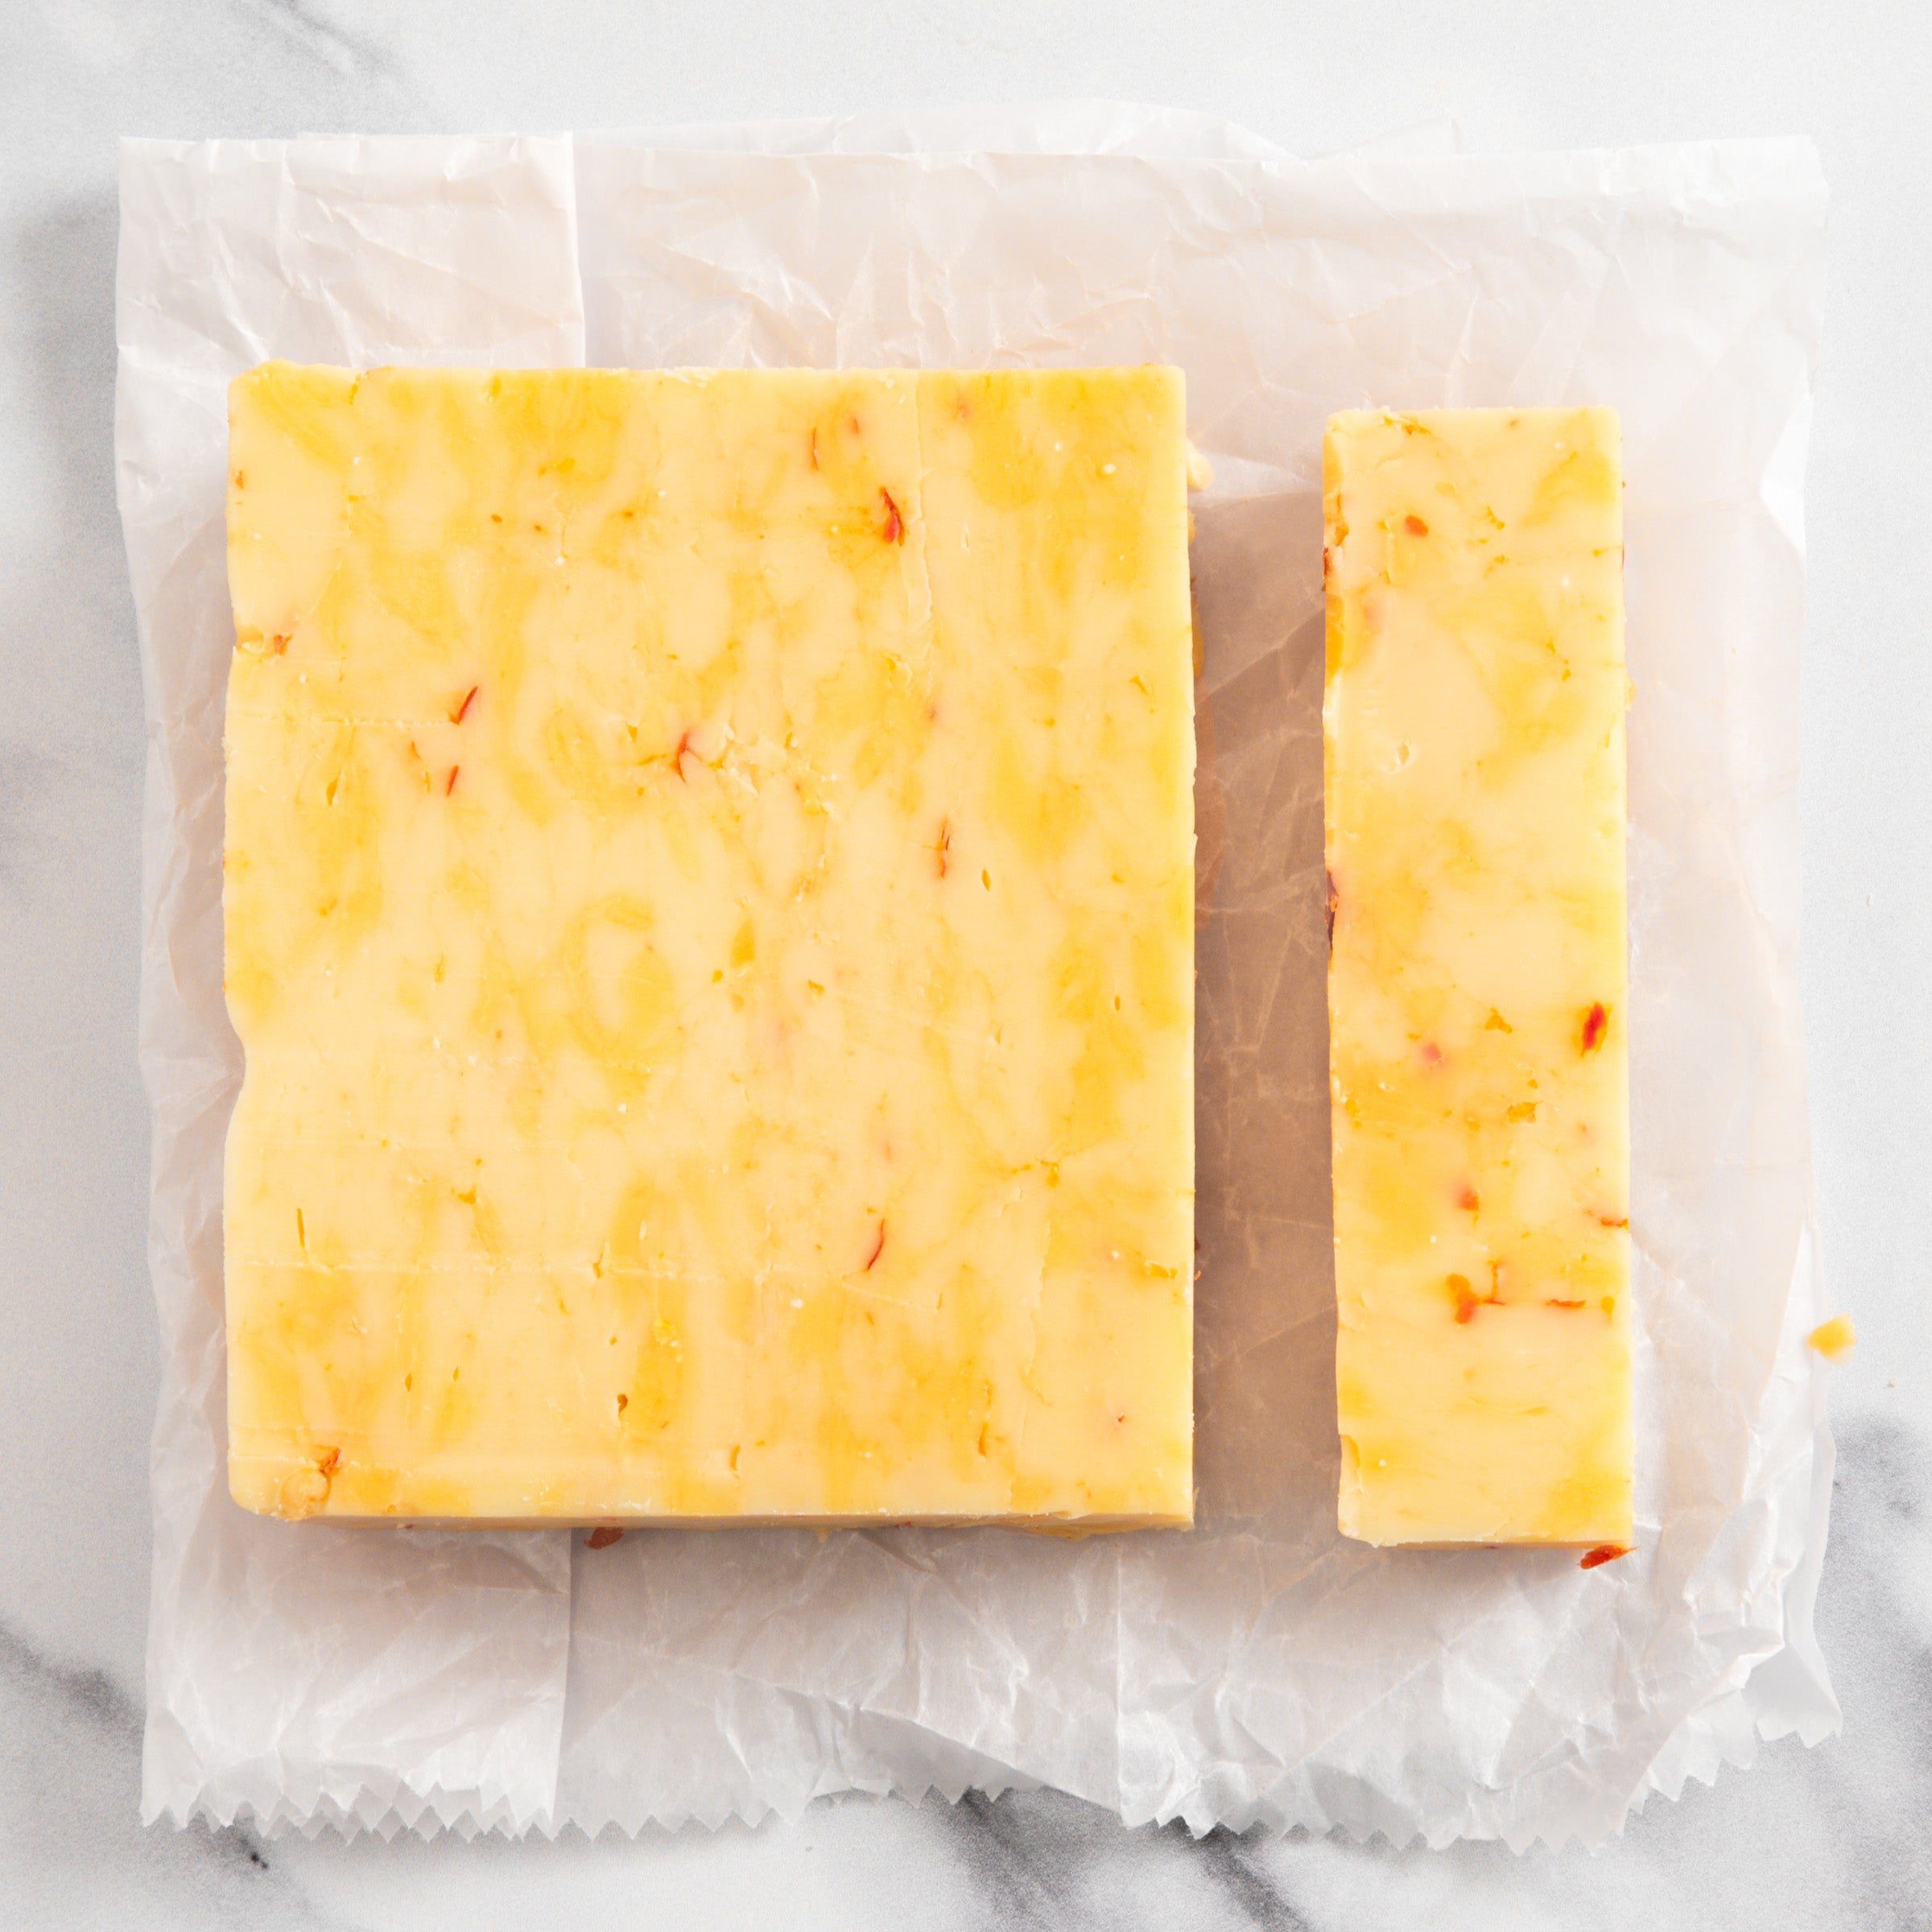 igourmet_15451_Irish Cheddar with Chili Peppers_Tipperary_Cheese